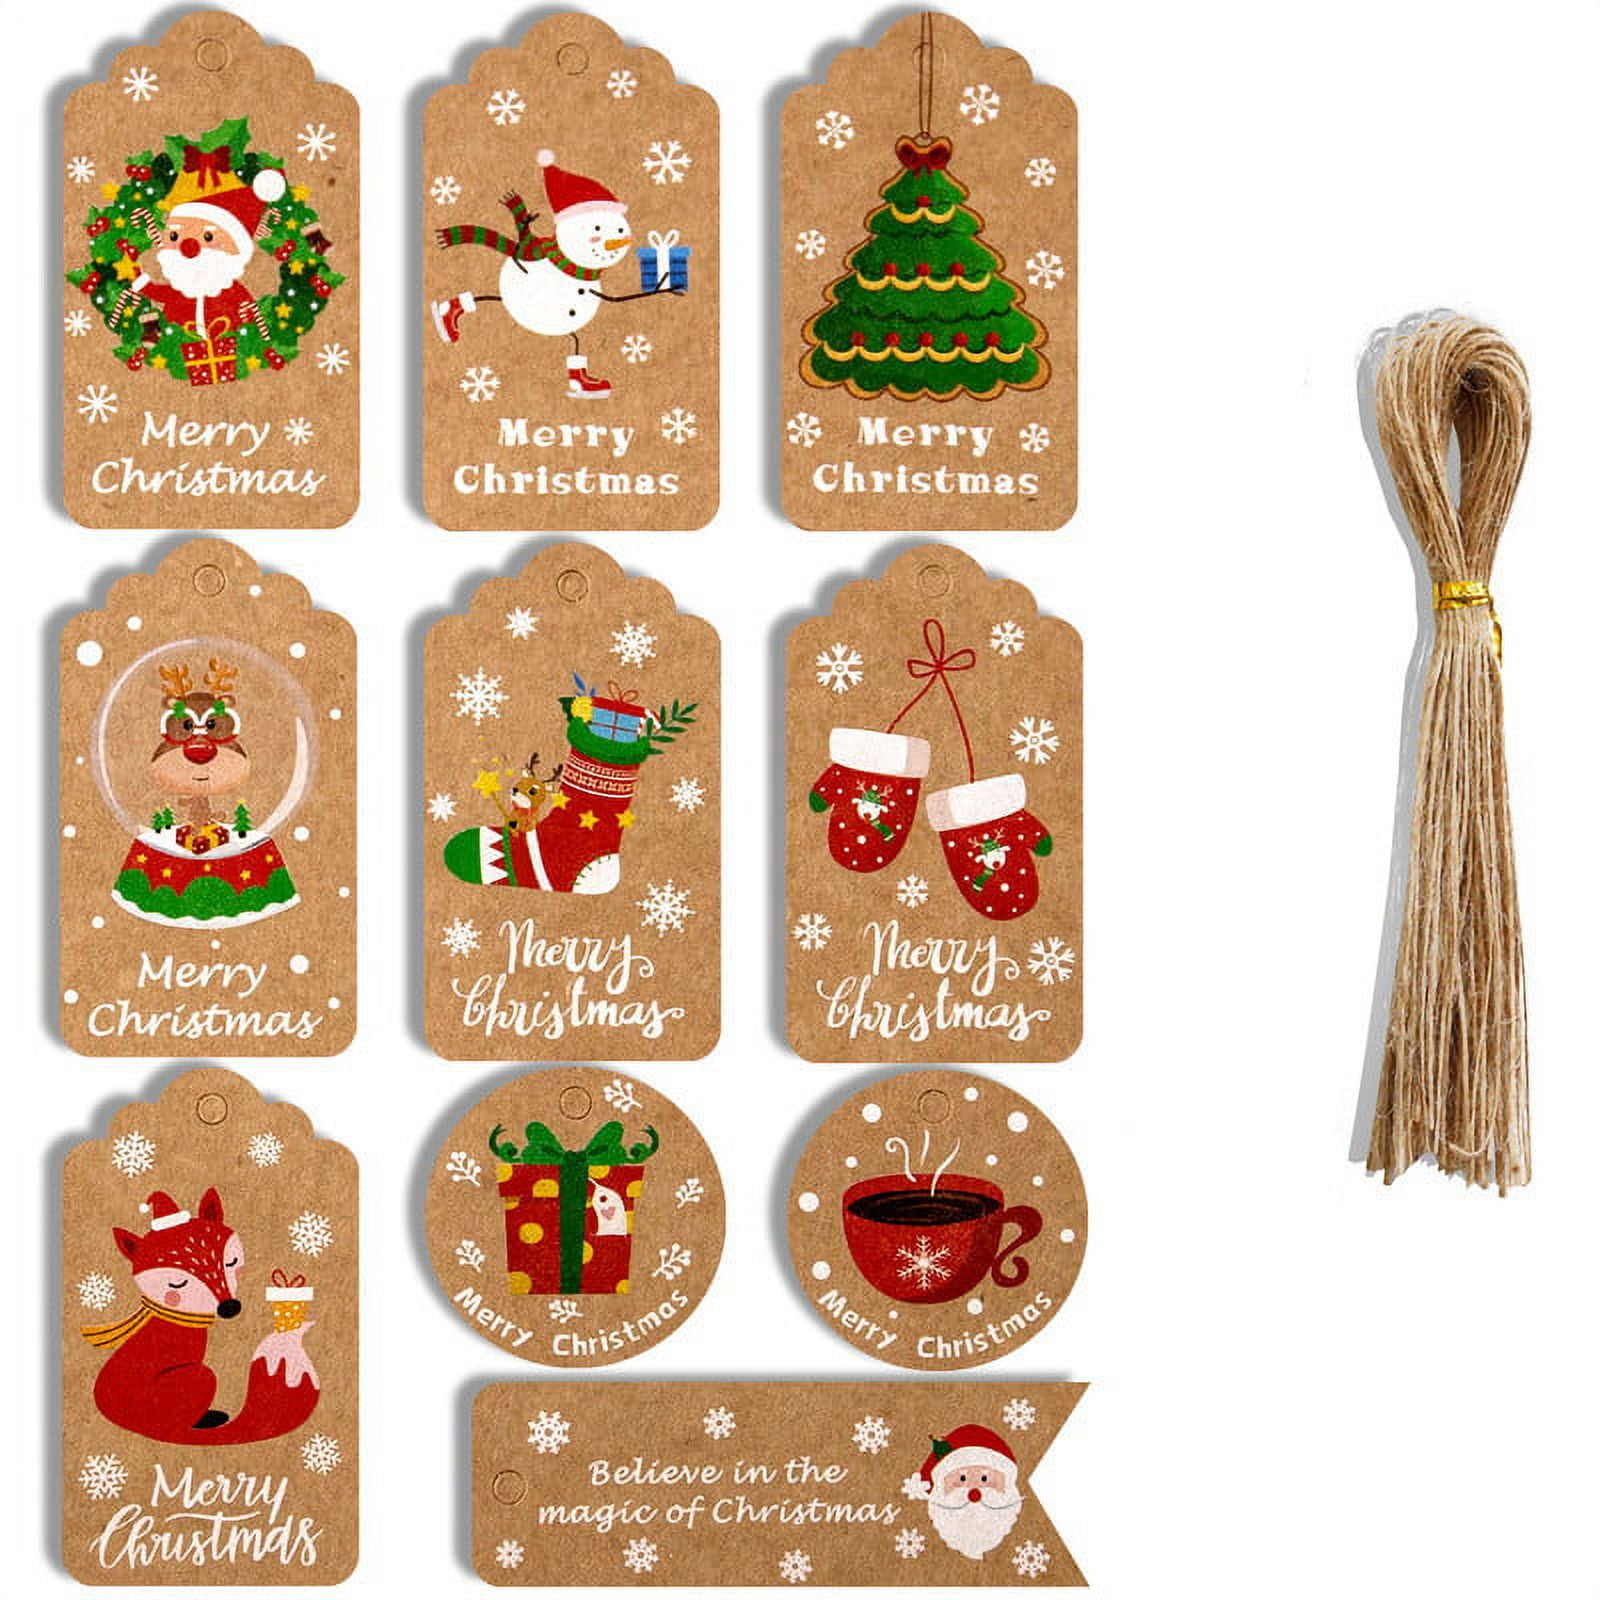 Christmas Name Tags Self Adhesive Gift Tag Stickers Xmas Presents Labels  with Santa Claus Snowmen Xmas Tree Deer for Festival Christmas Birthday